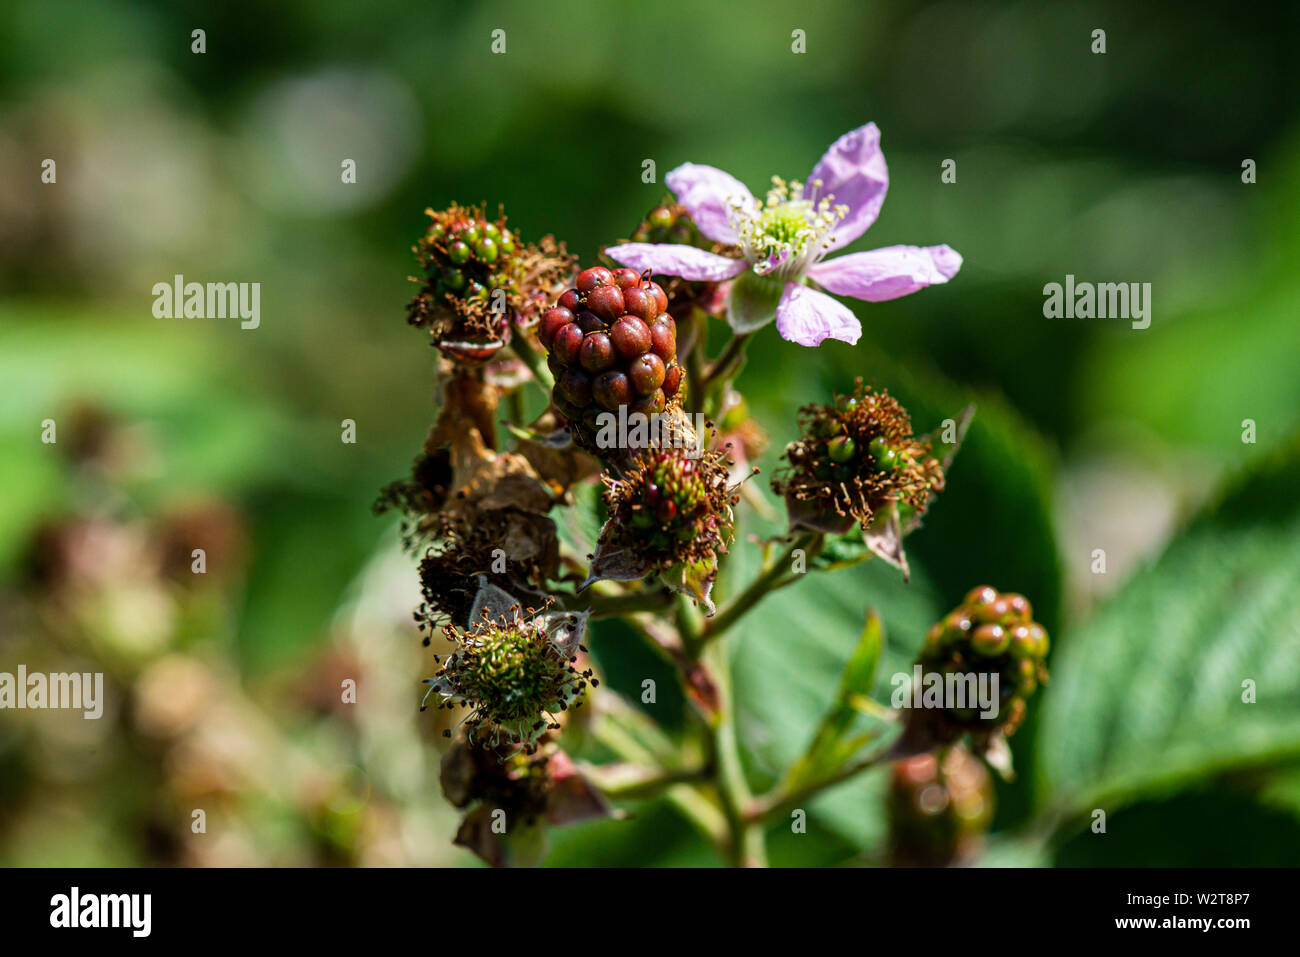 The flower and unripe fruit of a thornless blackberry Stock Photo